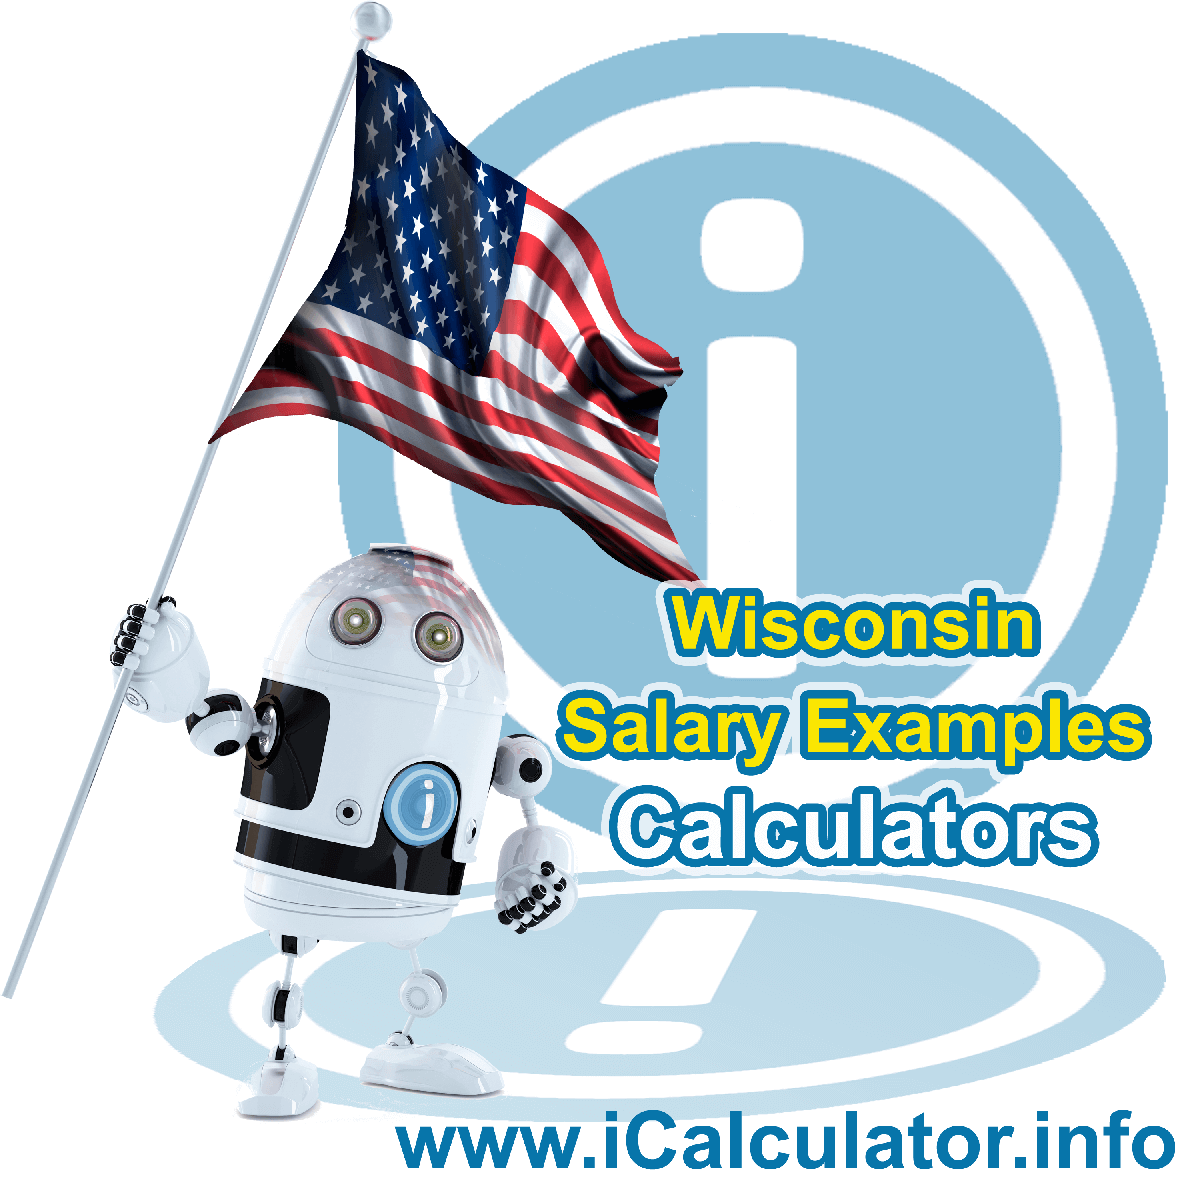 Wisconsin Salary Example for $ 80,000.00 in 2023 | iCalculator™ | $ 80,000.00 salary example for employee and employer paying Wisconsin State tincome taxes. Detailed salary after tax calculation including Wisconsin State Tax, Federal State Tax, Medicare Deductions, Social Security, Capital Gains and other income tax and salary deductions complete with supporting Wisconsin state tax tables 